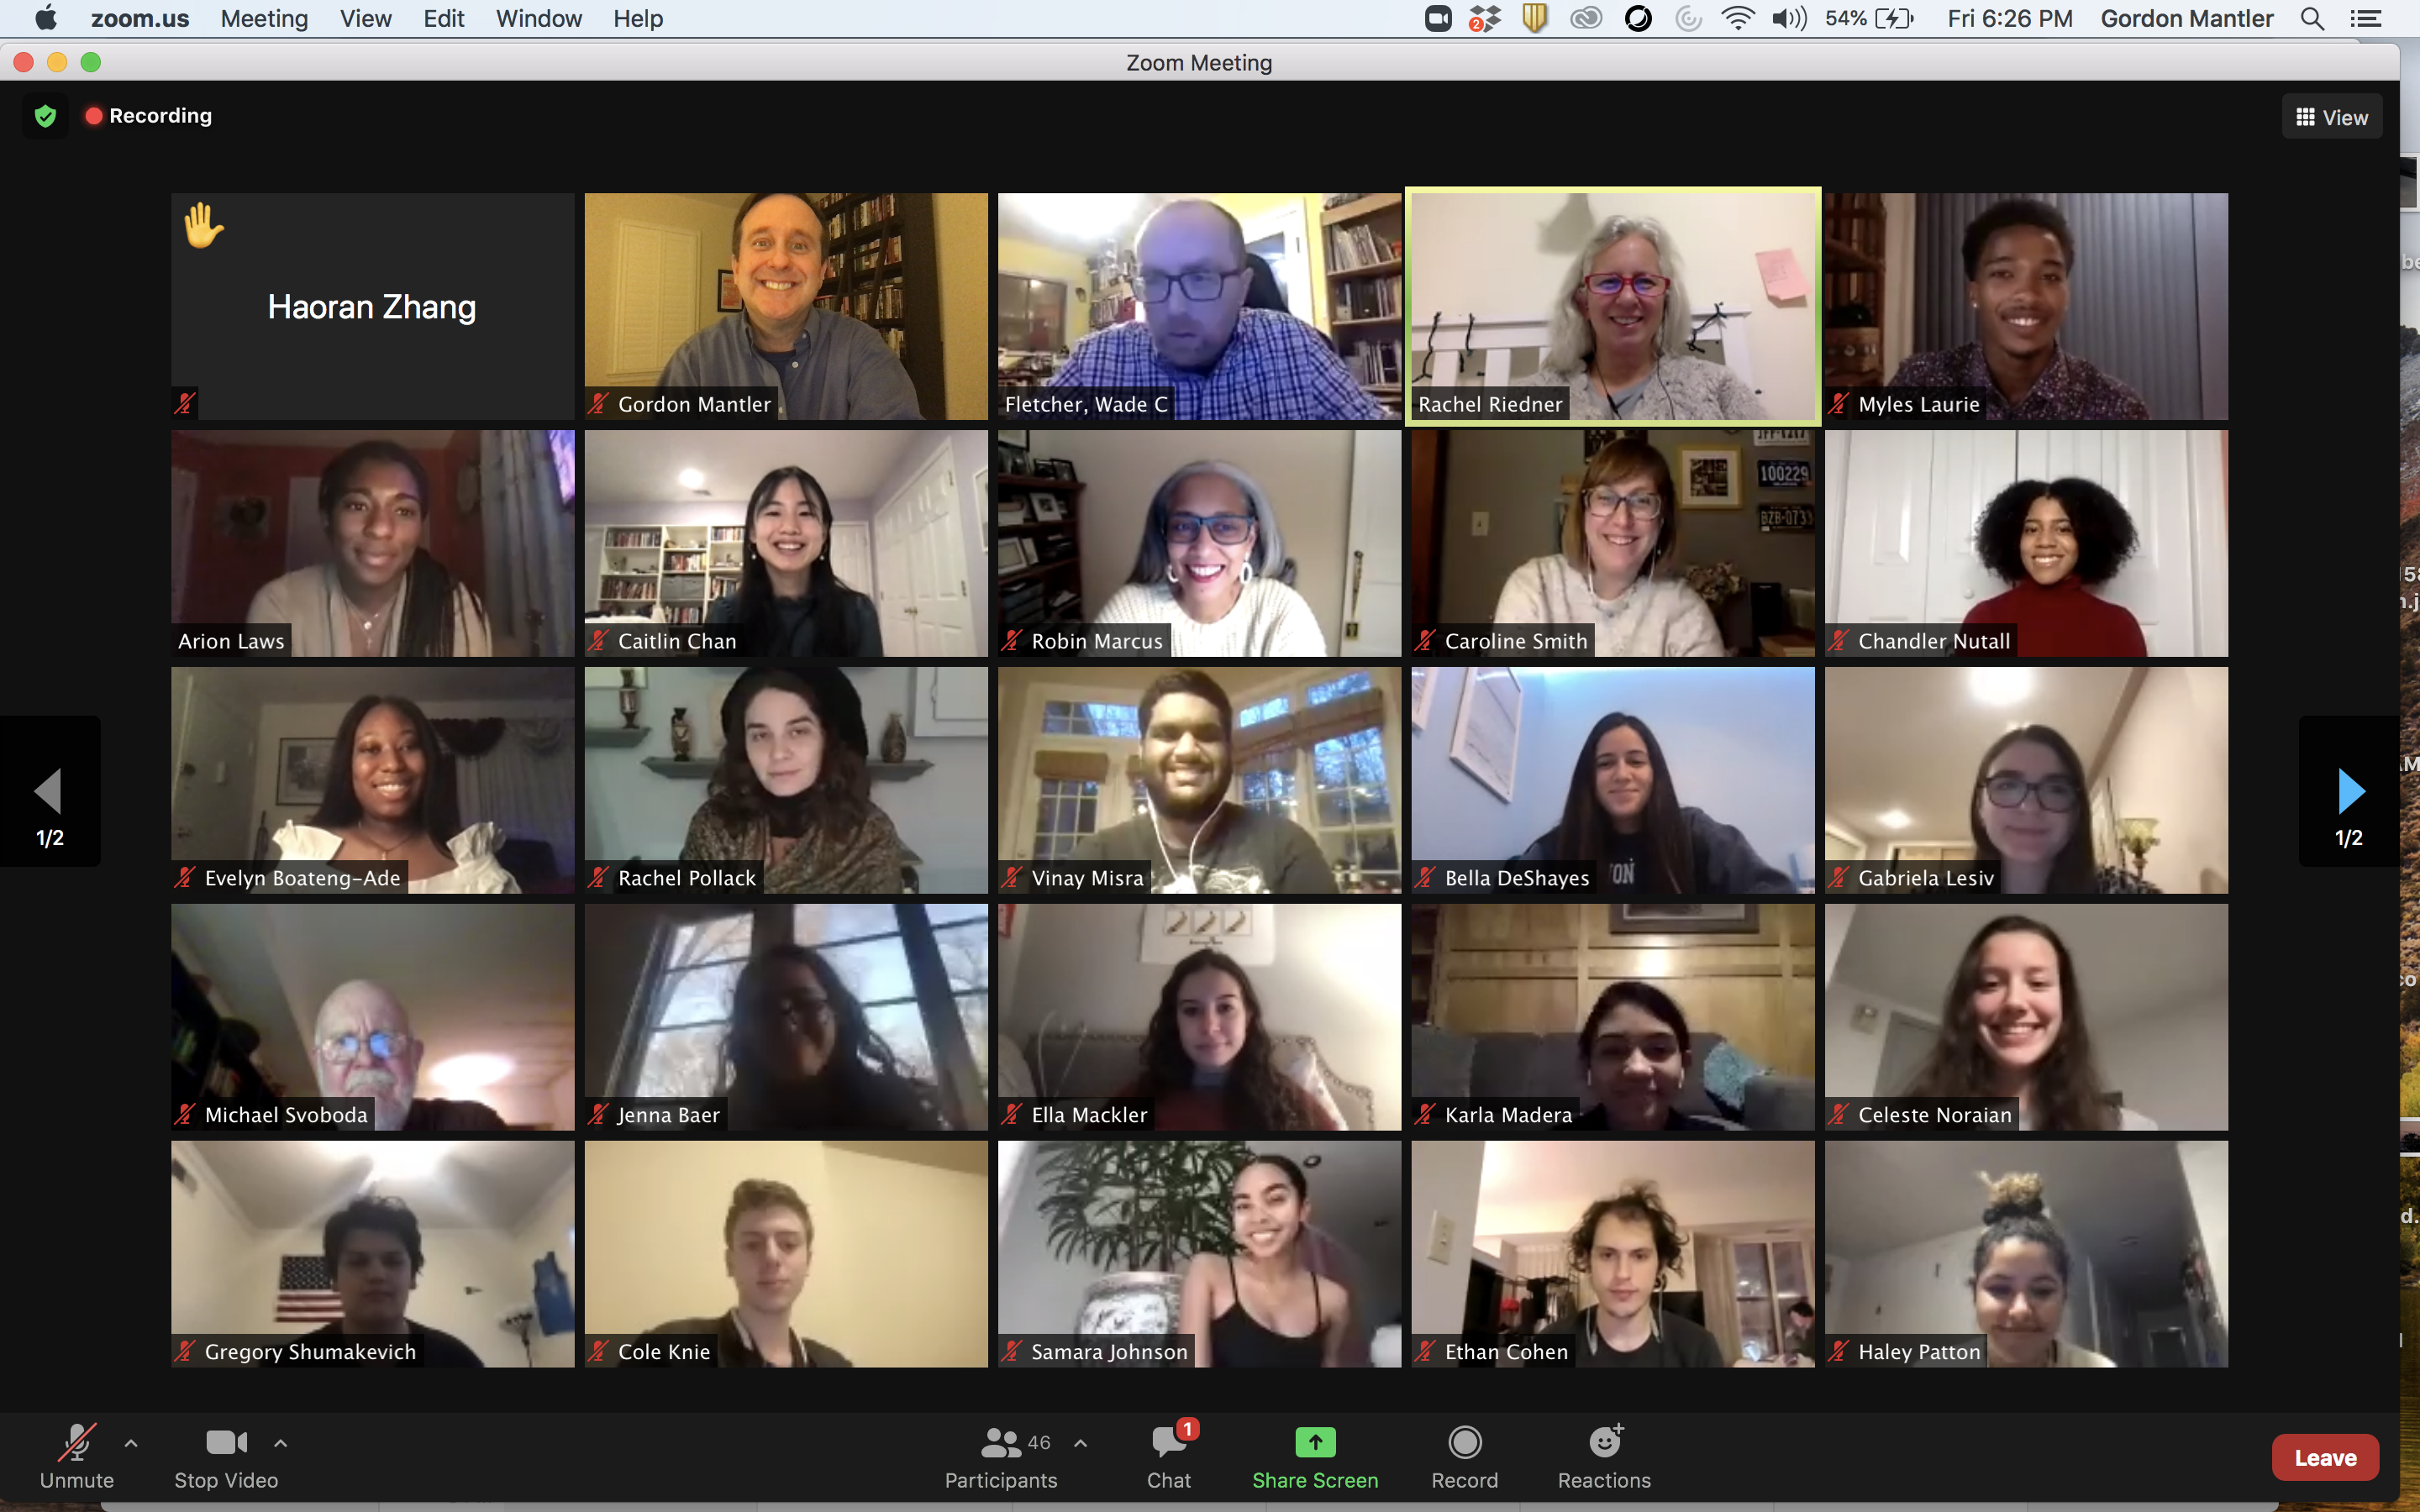 A screen capture of the Zoom screen during the alumni roundtable showing various faculty and former UWP students.